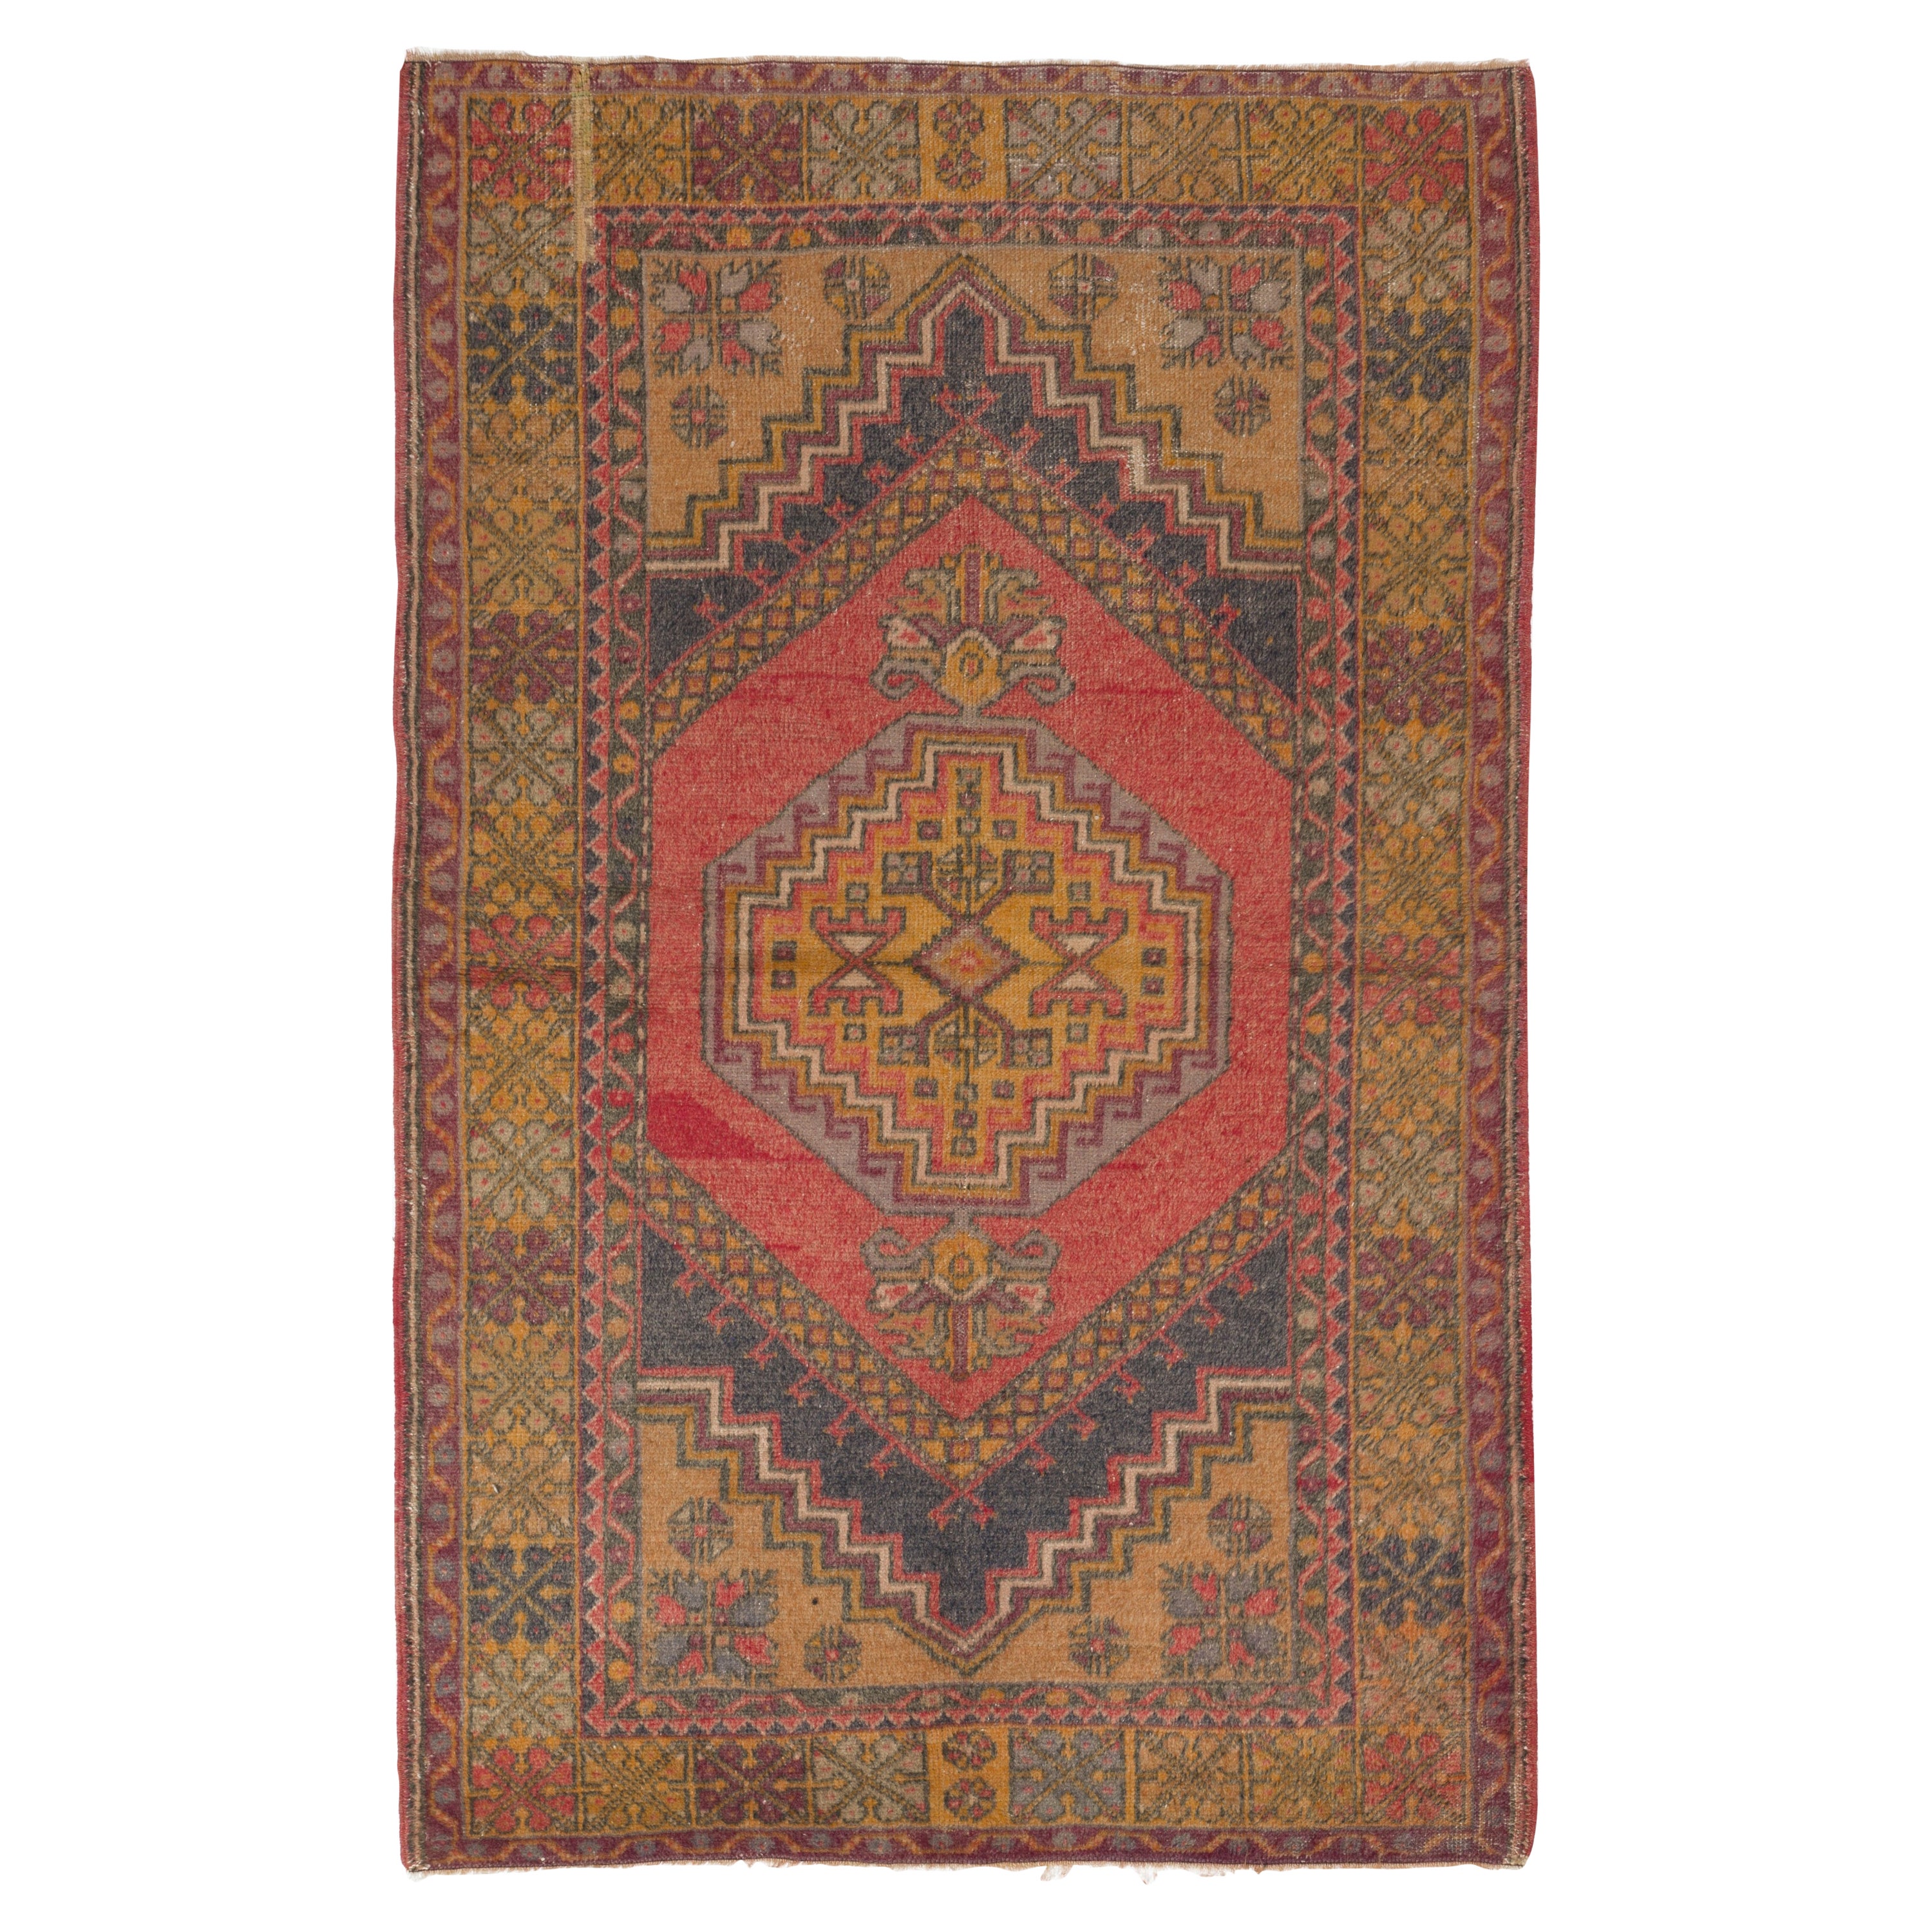 3.8x5.8 Ft Vintage Hand-Knotted Turkish Wool Rug, Authentic 1950s Floor Covering For Sale